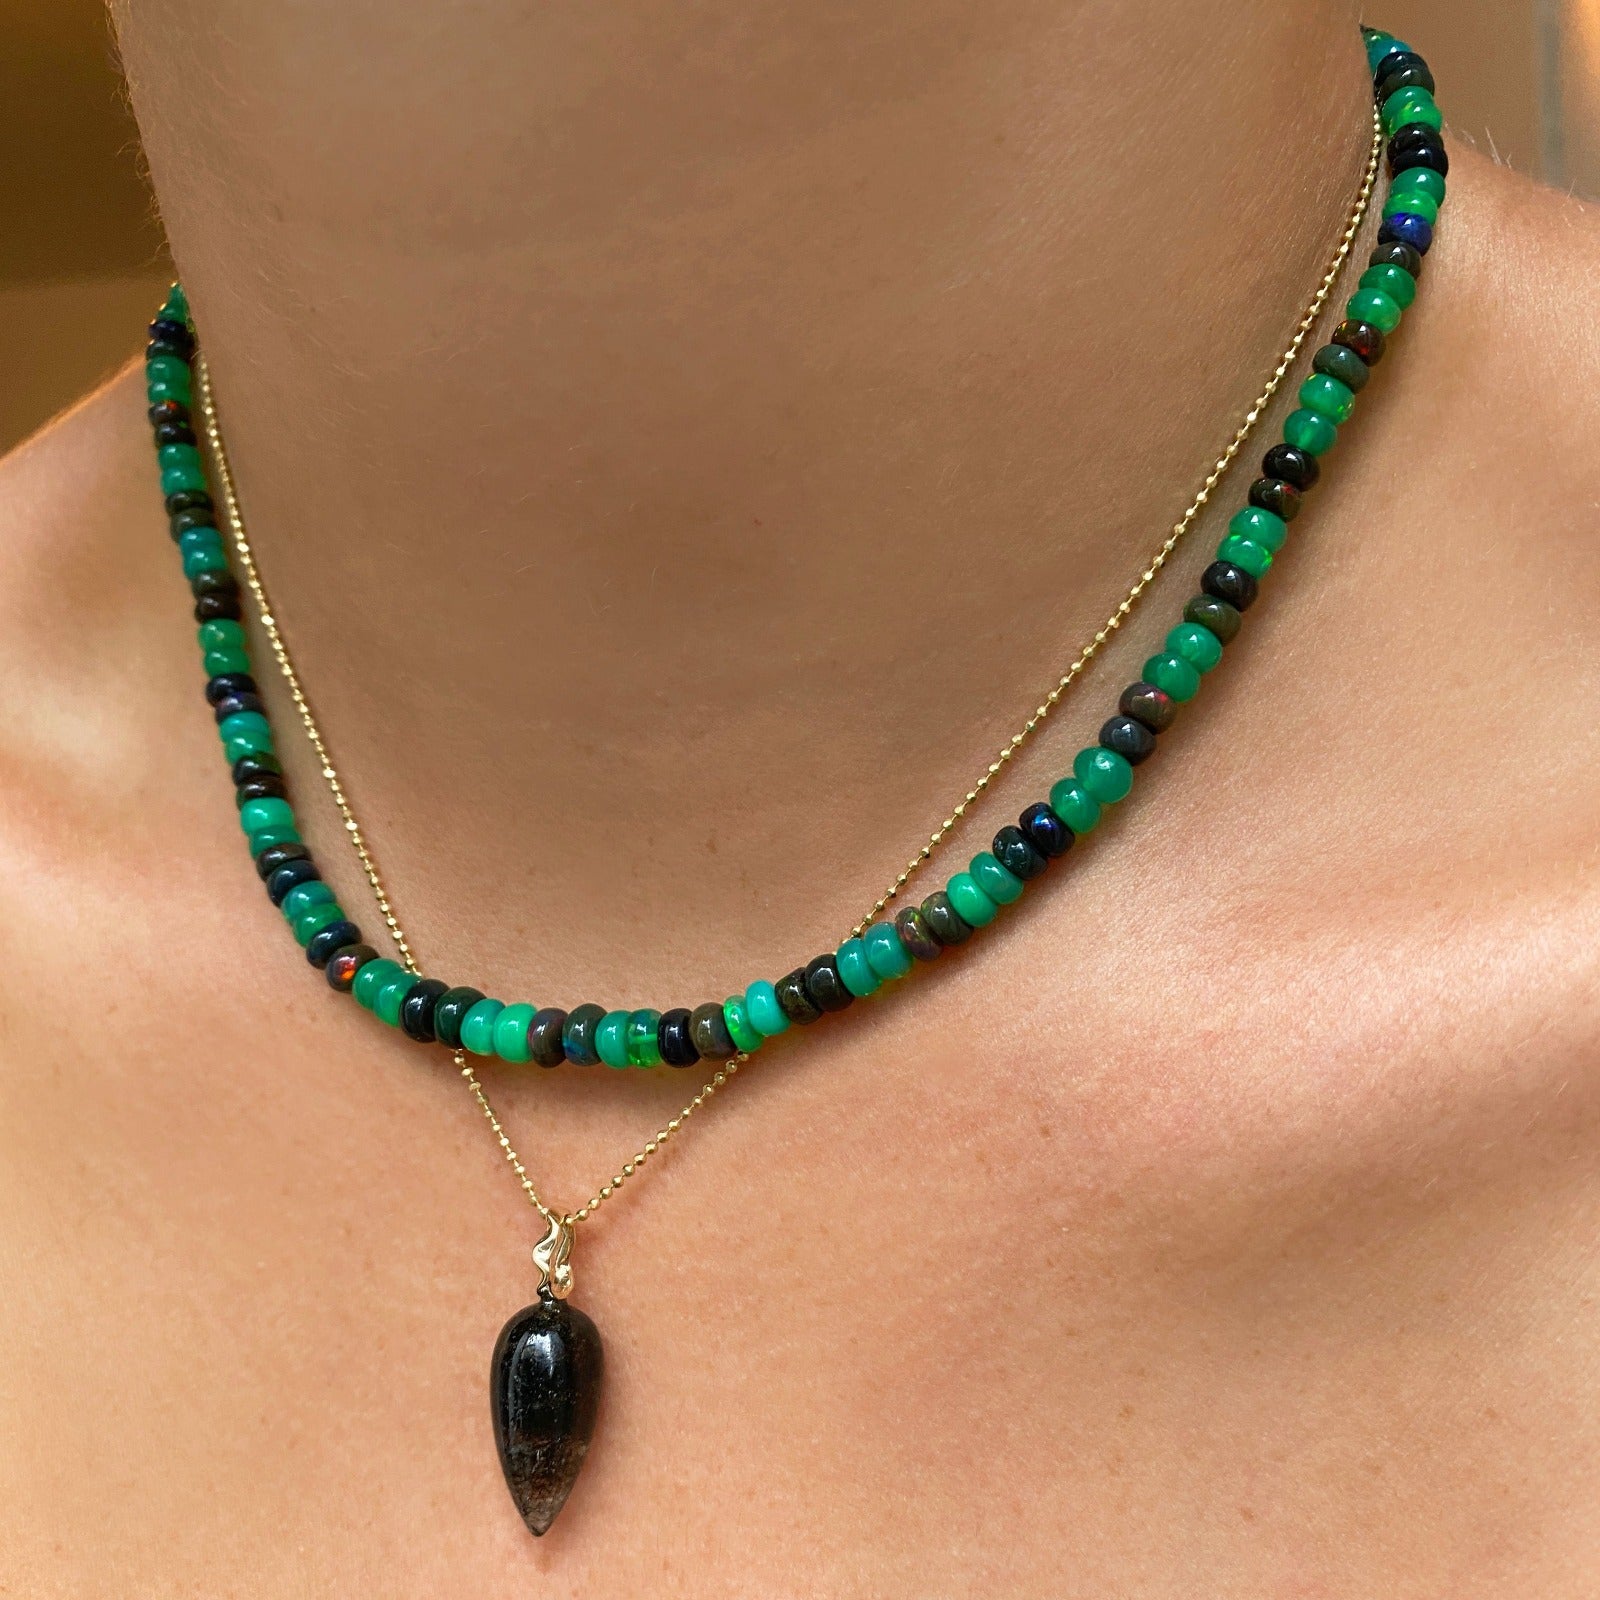 Shimmering beaded necklace made of smooth opal rondels in shades of green and black on a slim gold lobster clasp. Styled on a neck layered with a diamond cut bead chain necklace and acorn drop charm. 